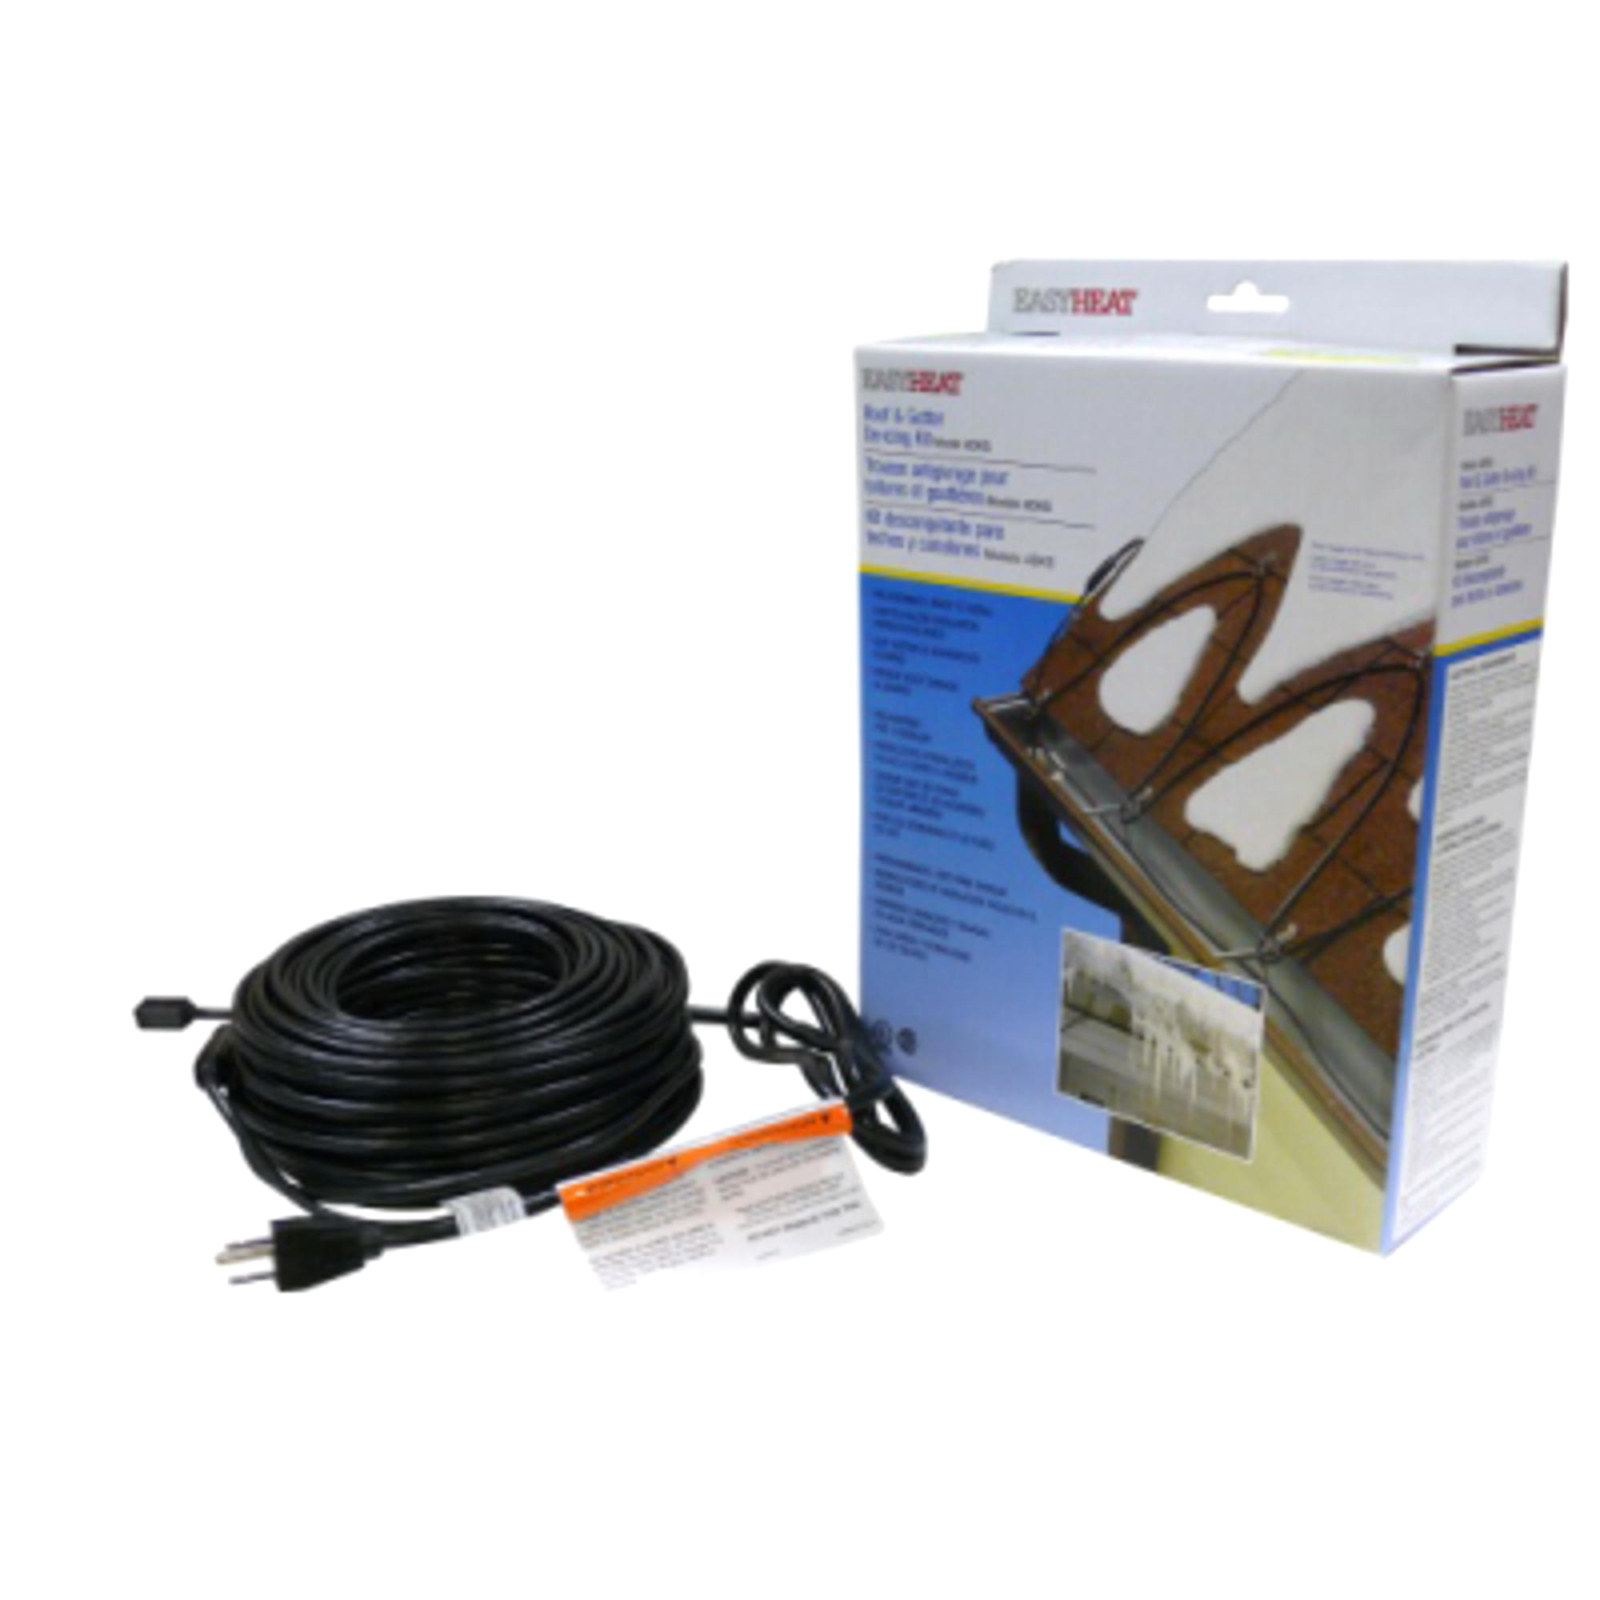 Easy Heat ADKS-400  80' Cable for Roof and Gutter De-Icing